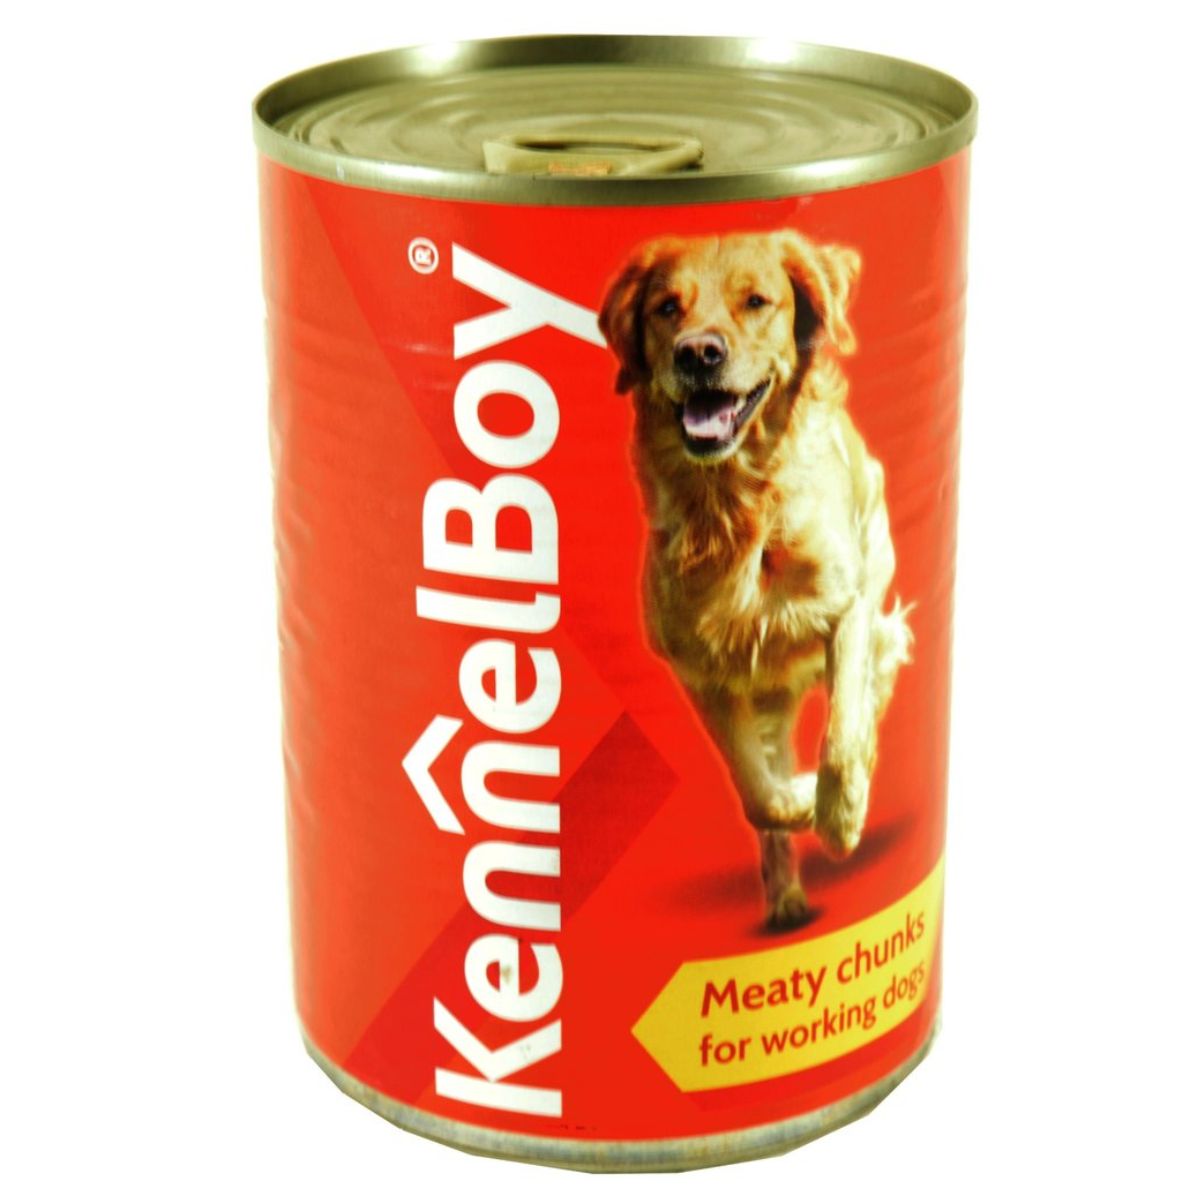 Kennelboy - Meaty Chunks For Working Dogs - 800g in a can.